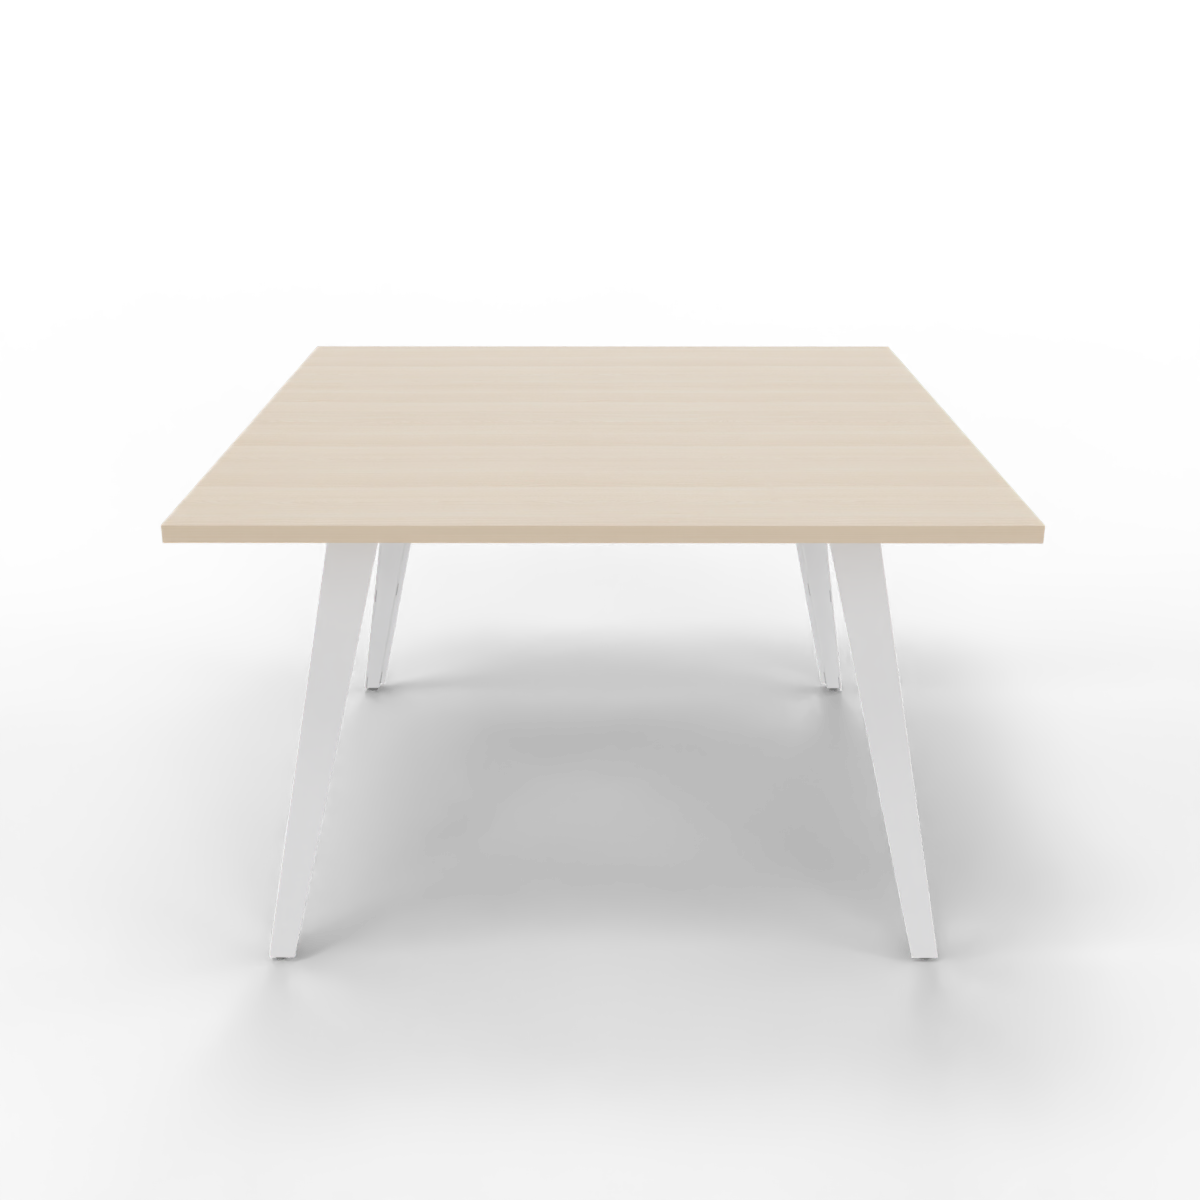 Spider meeting table